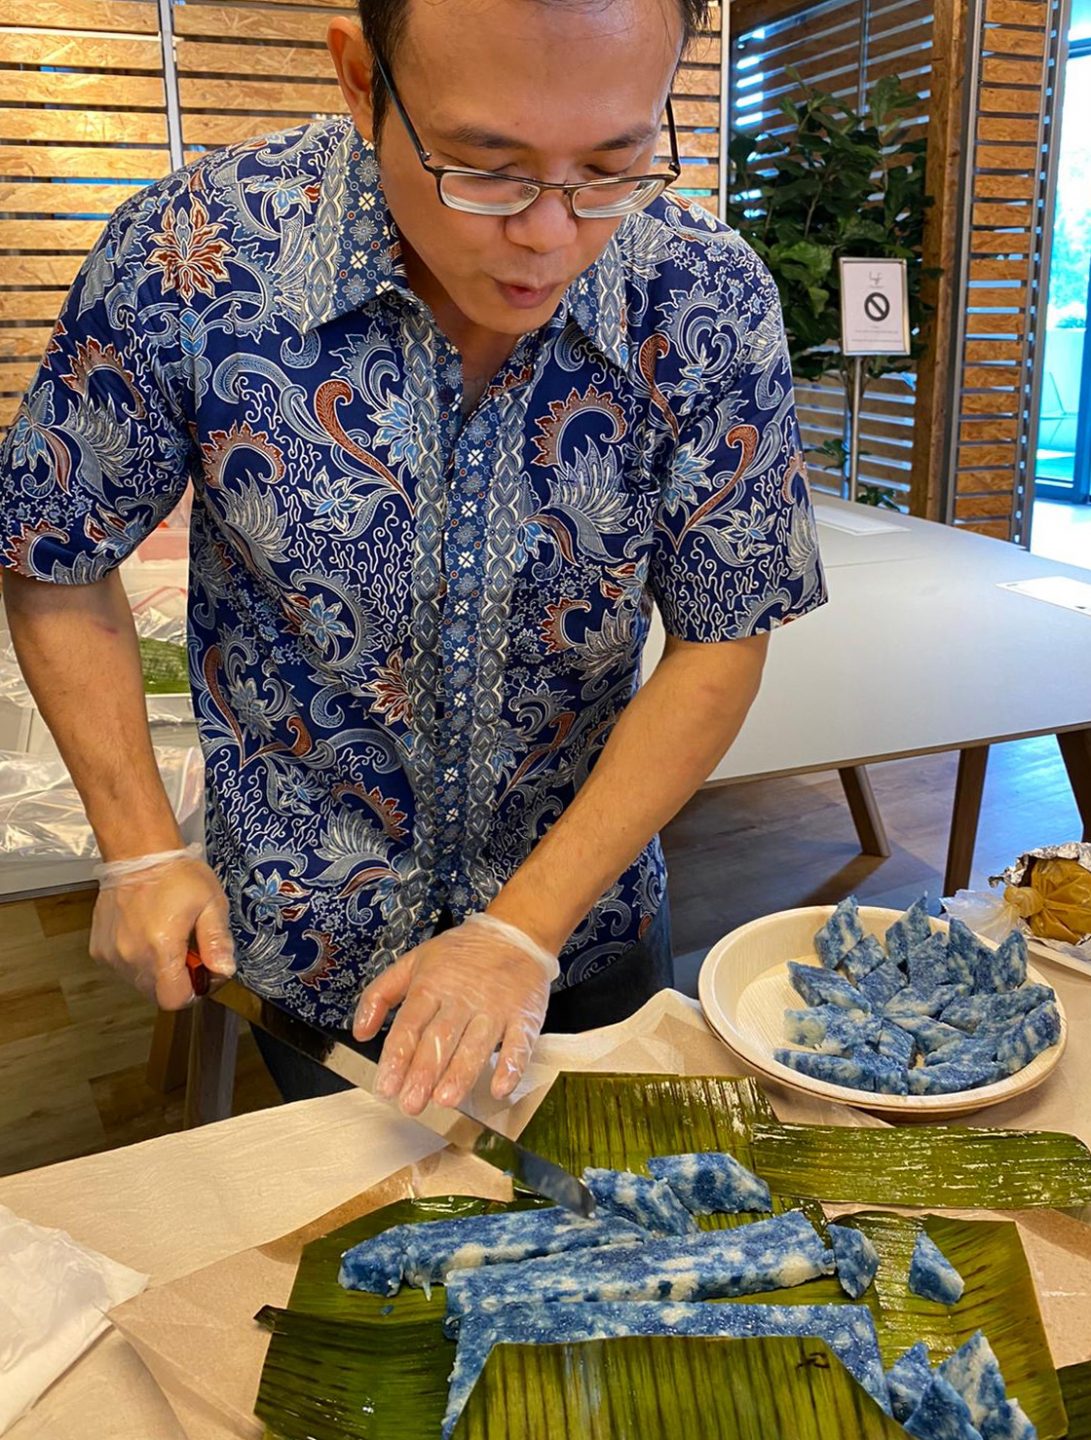 Christopher cutting up pulot tartar (pressed sticky rice) during the launch of his award-winning heritage food book, The Way of Kueh.